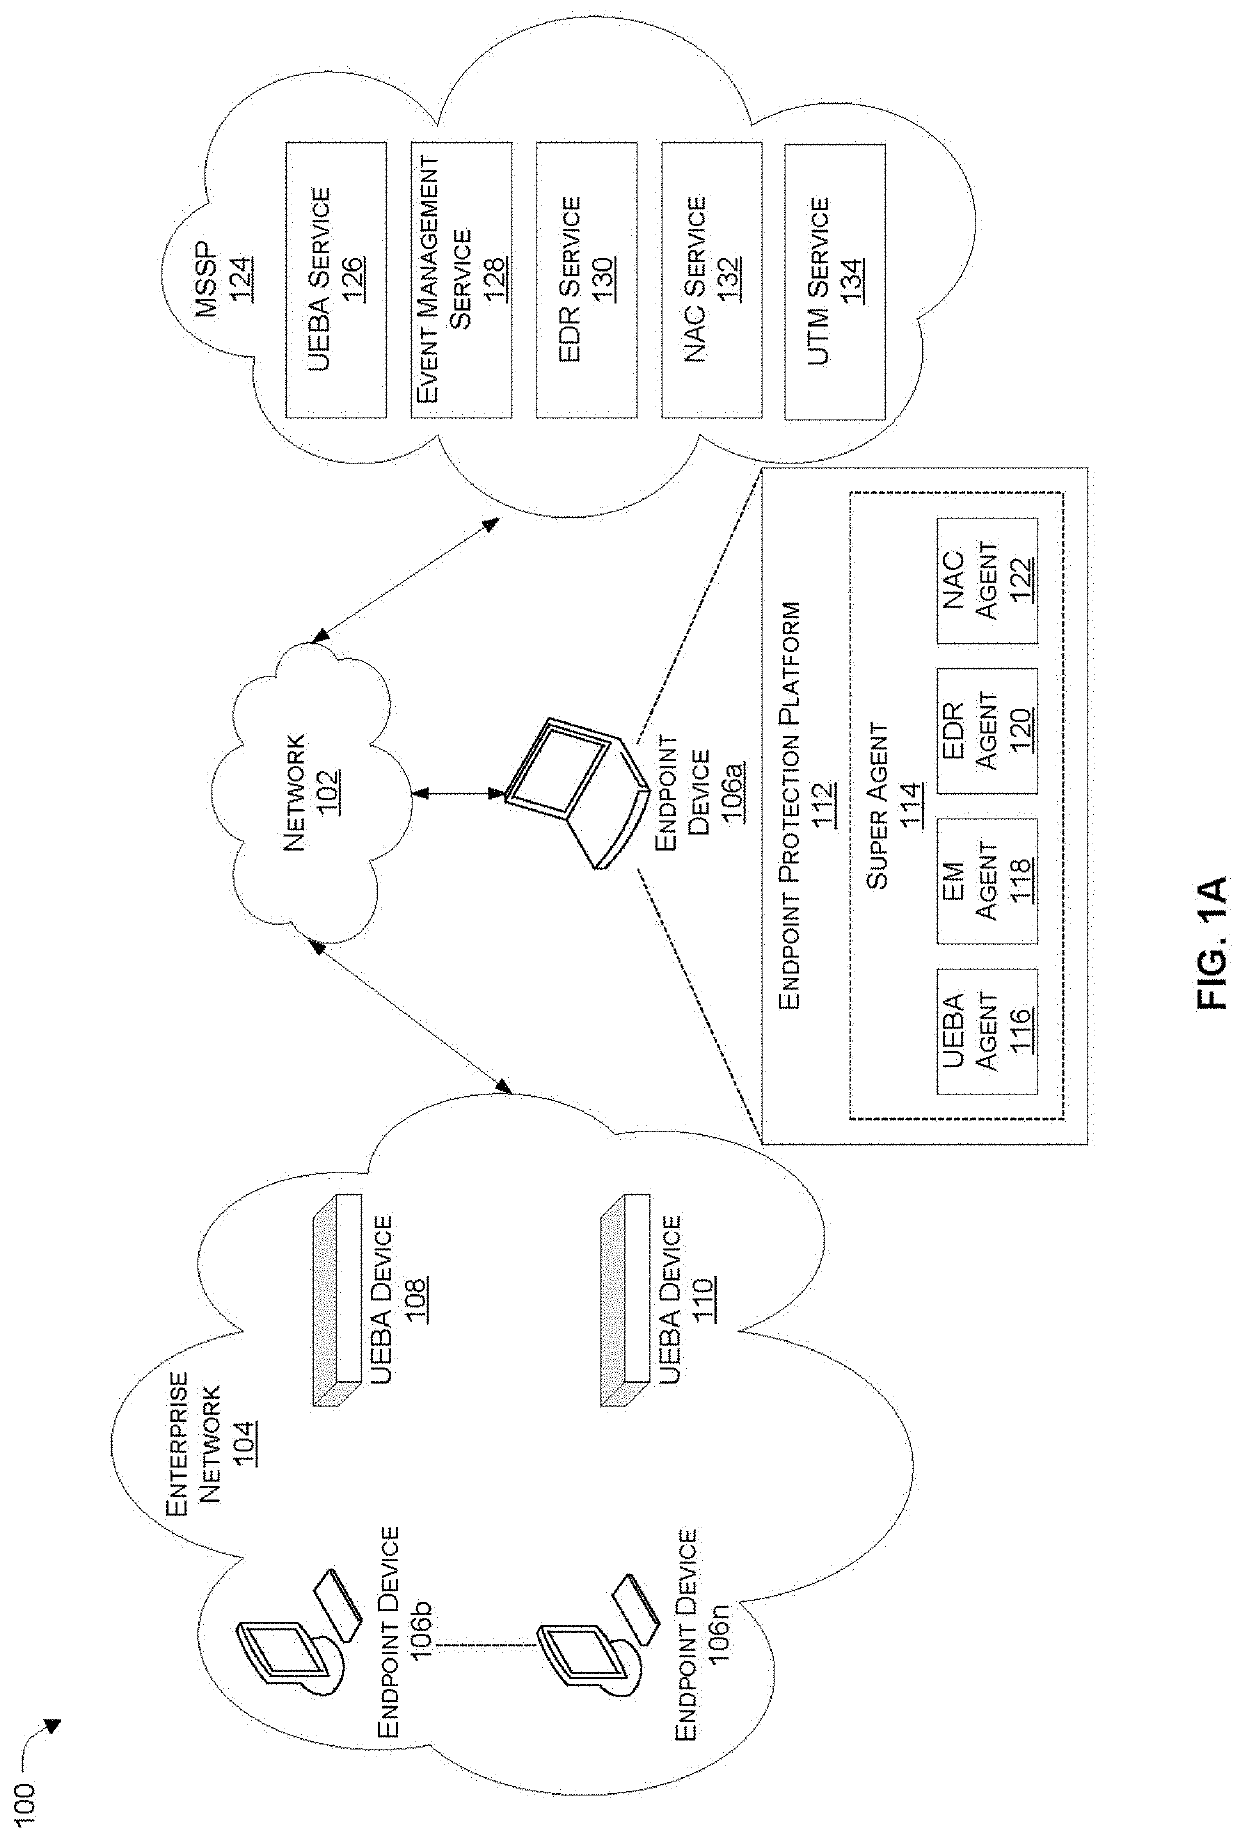 Facilitating identification of compromised devices by network access control (NAC) or unified threat management (UTM) security services by leveraging context from an endpoint detection and response (EDR) agent